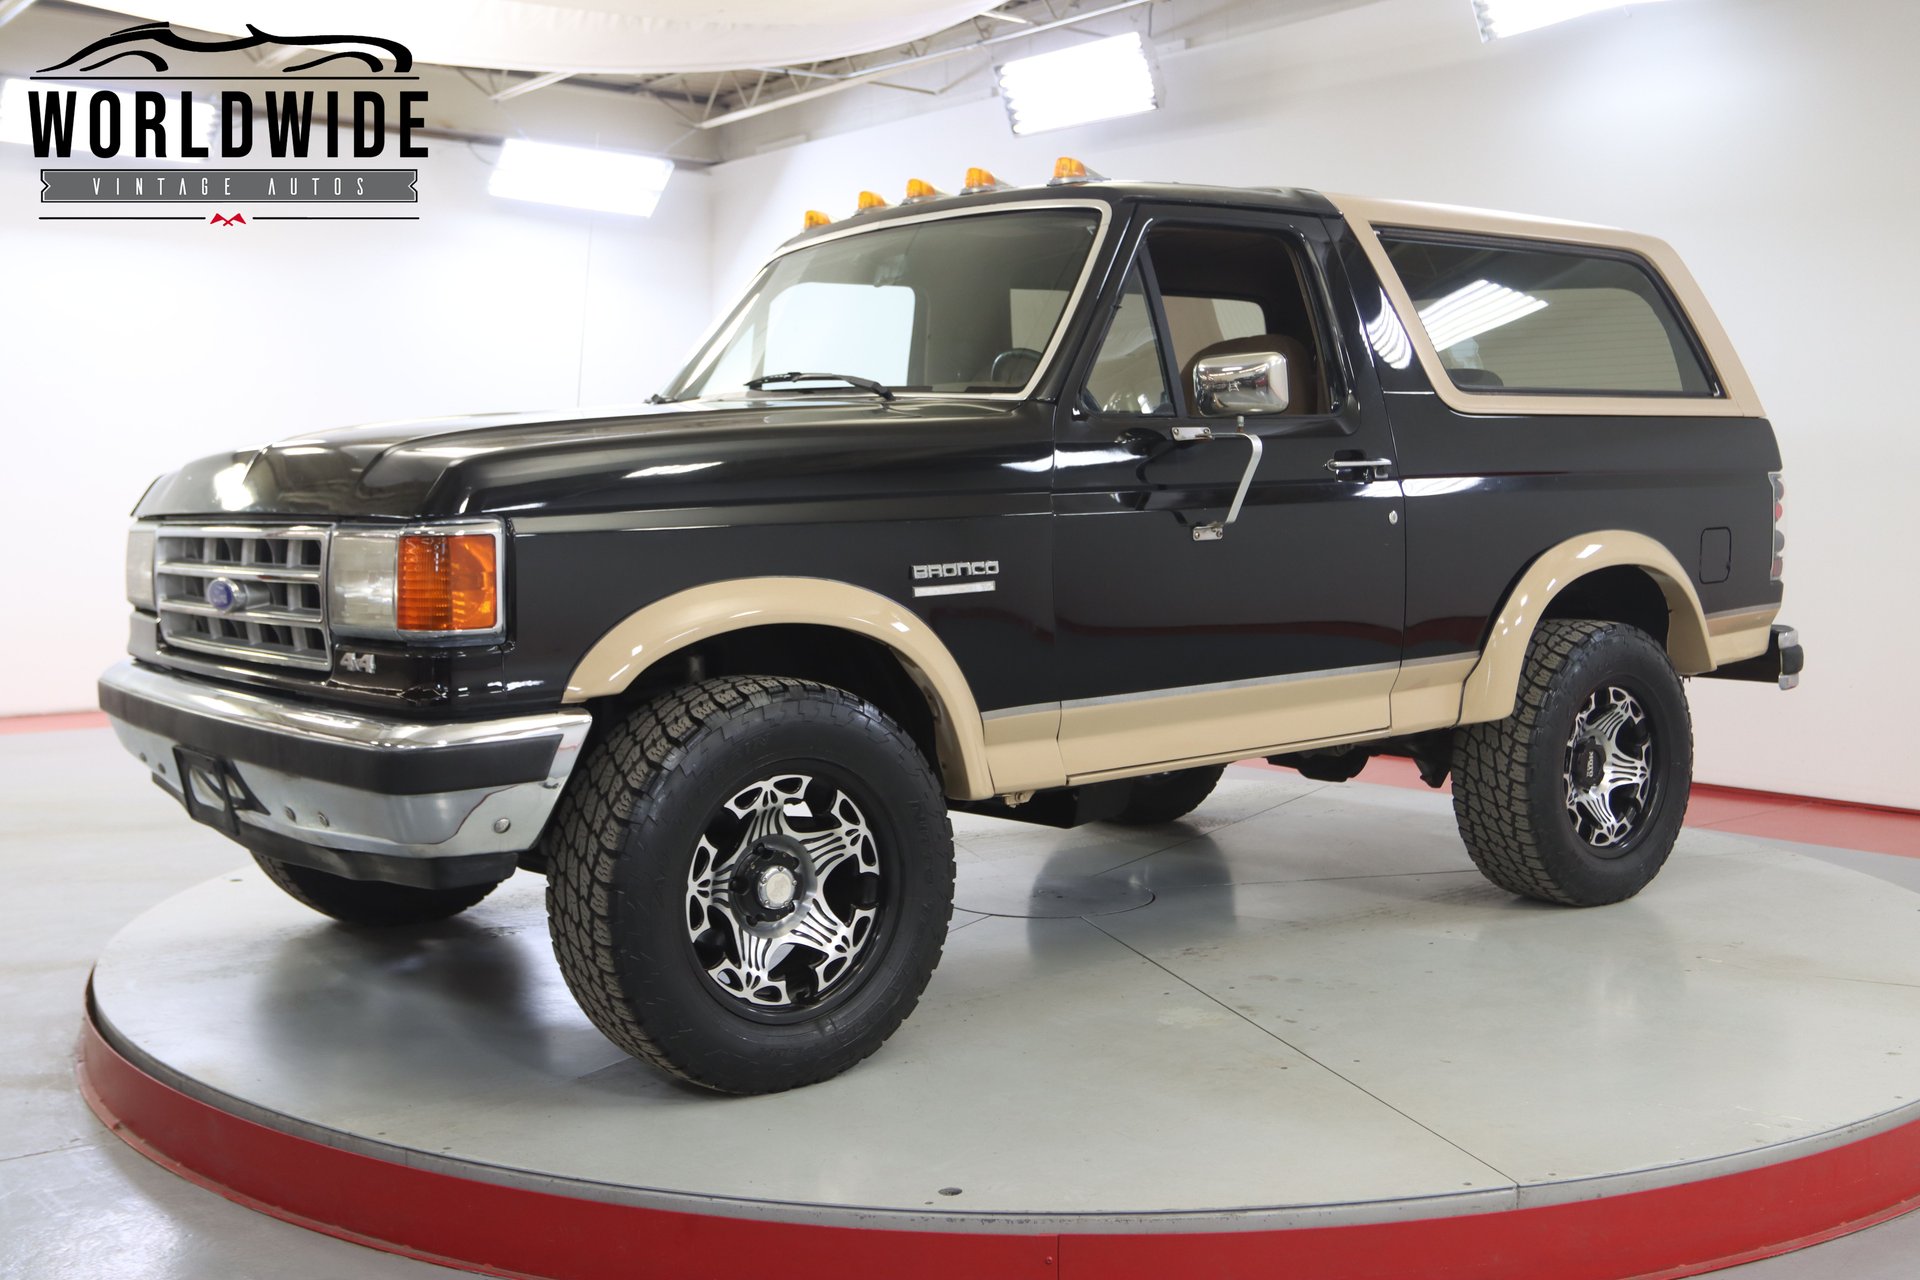 1991 ford bronco